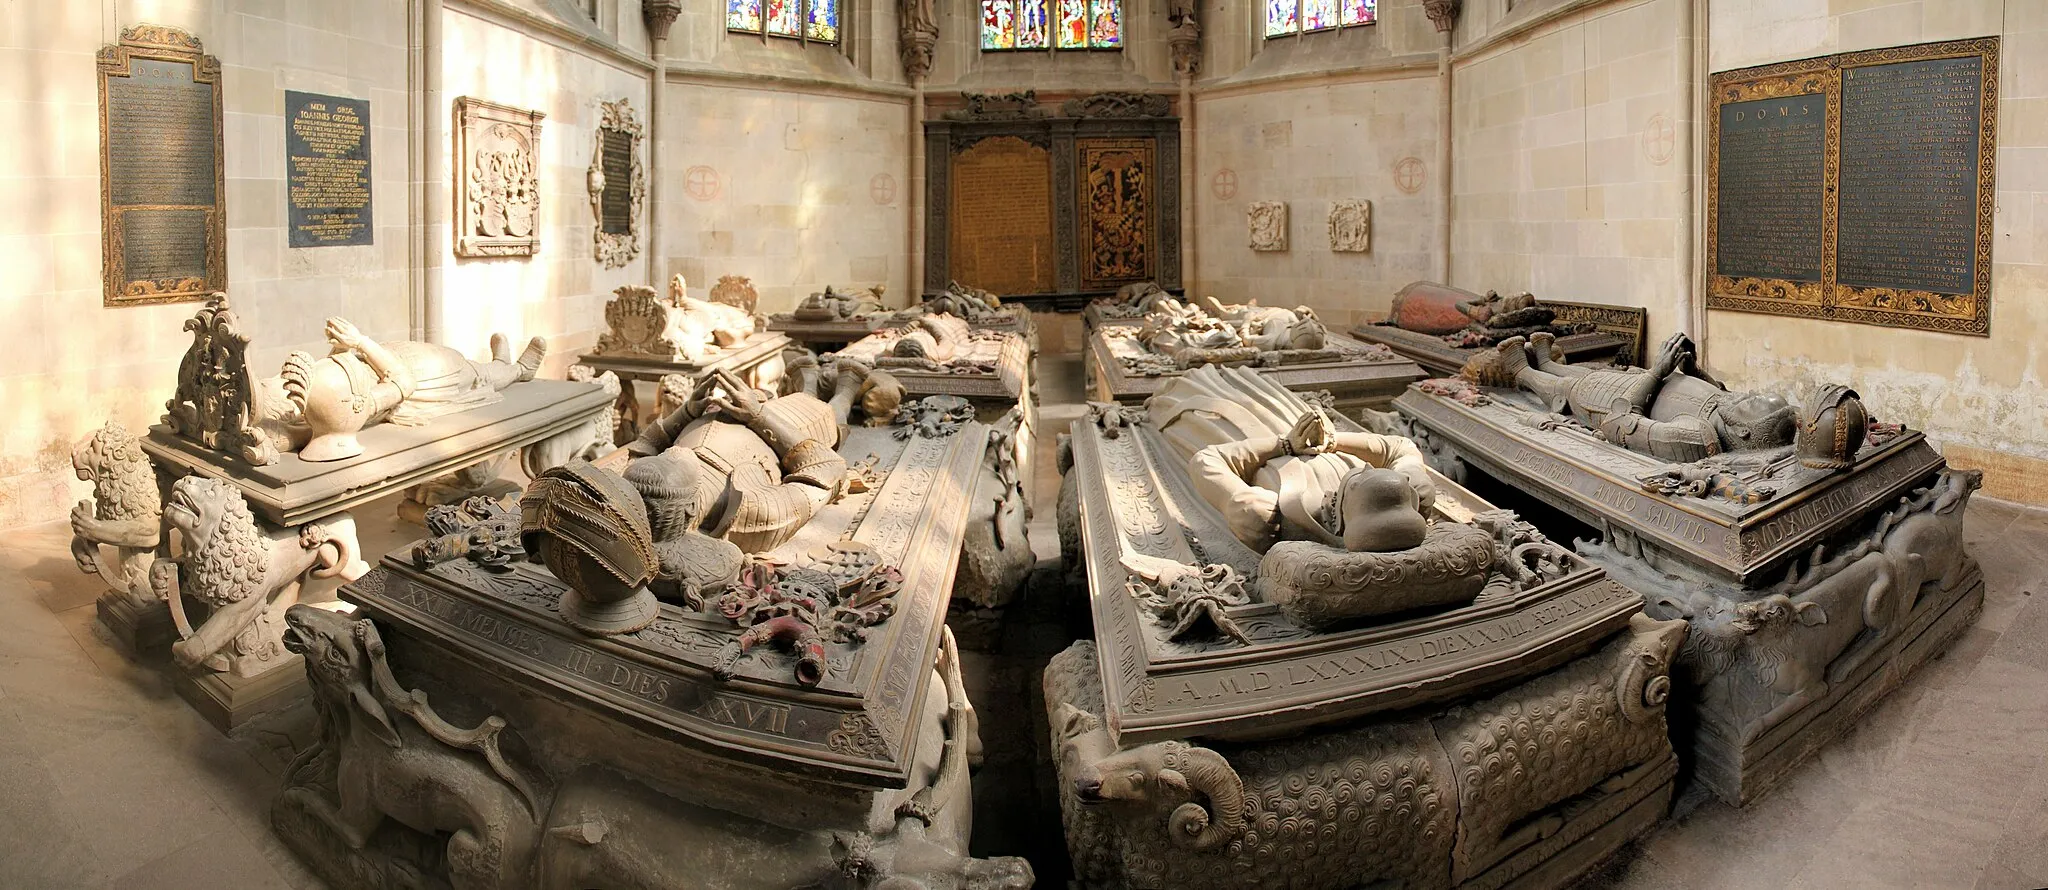 Photo showing: Burial ground in the choir of St. George's Collegiate Church, Tübingen, Germany.